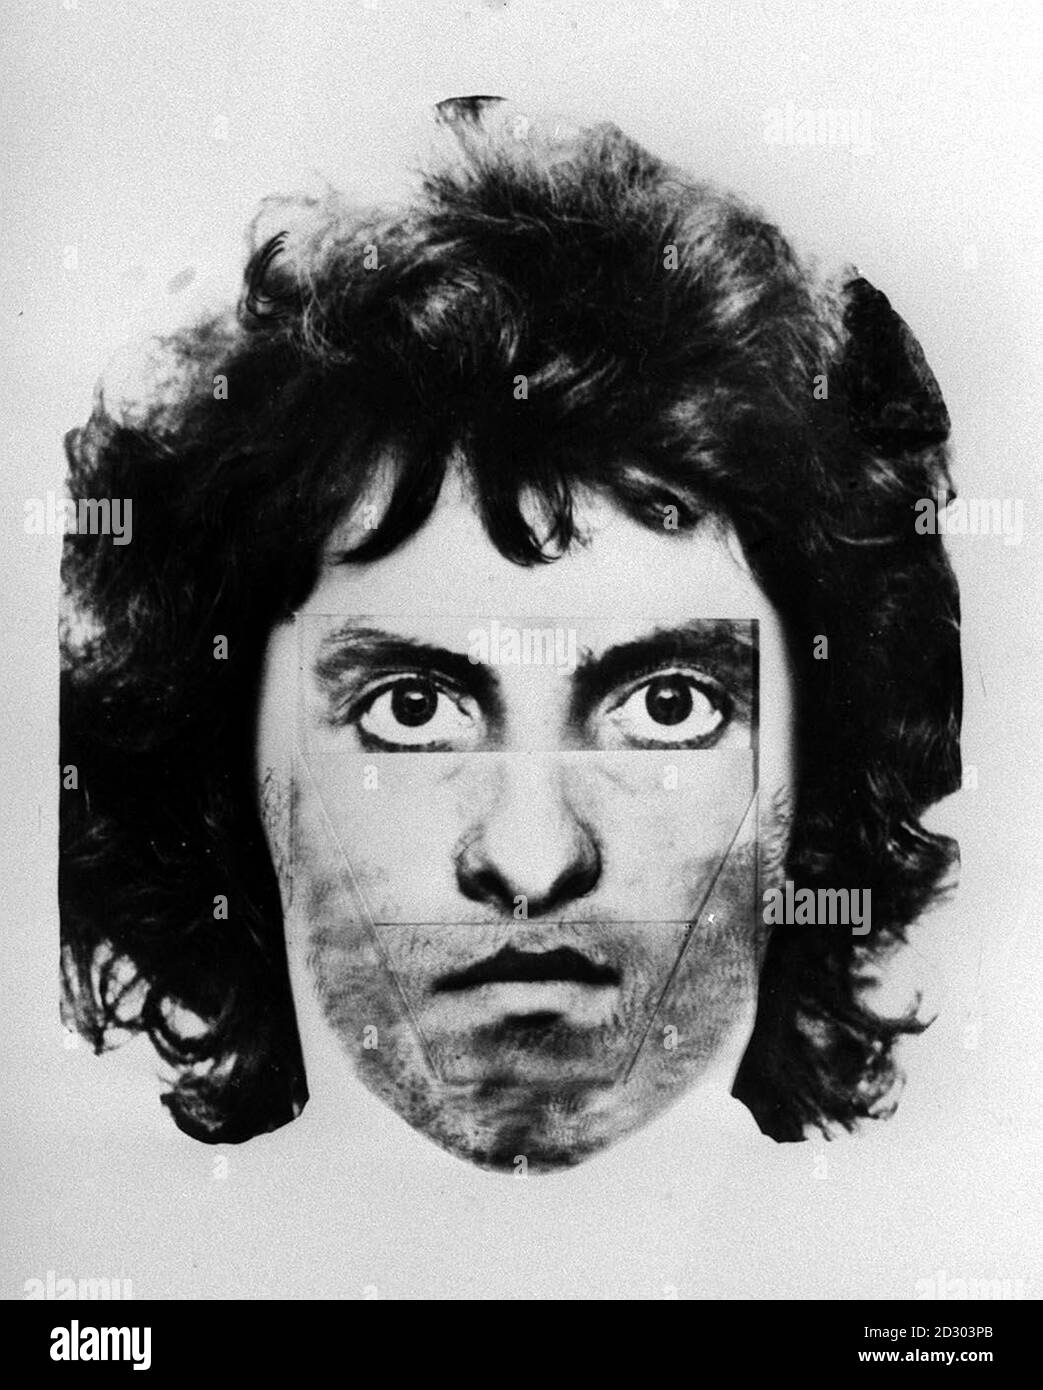 PA NEWS PHOTO 31/12/82  A PHOTOFIT IMPRESSION OF A MAN IN CONNECTION WITH THE MURDER OF MISS ESME HOAD FOUND BATTERED TO DEATH AT HER HOME IN TONBRIDGE, KENT. THE PHOTOFIT IS THOUGHT TO BE A GOOD LIKENESS OF THE MAN WHO VISITED THE HOUSE ON SEVERAL OCCASIONS DURING THE MONTH LEADING UP TO HER DEATH Stock Photo